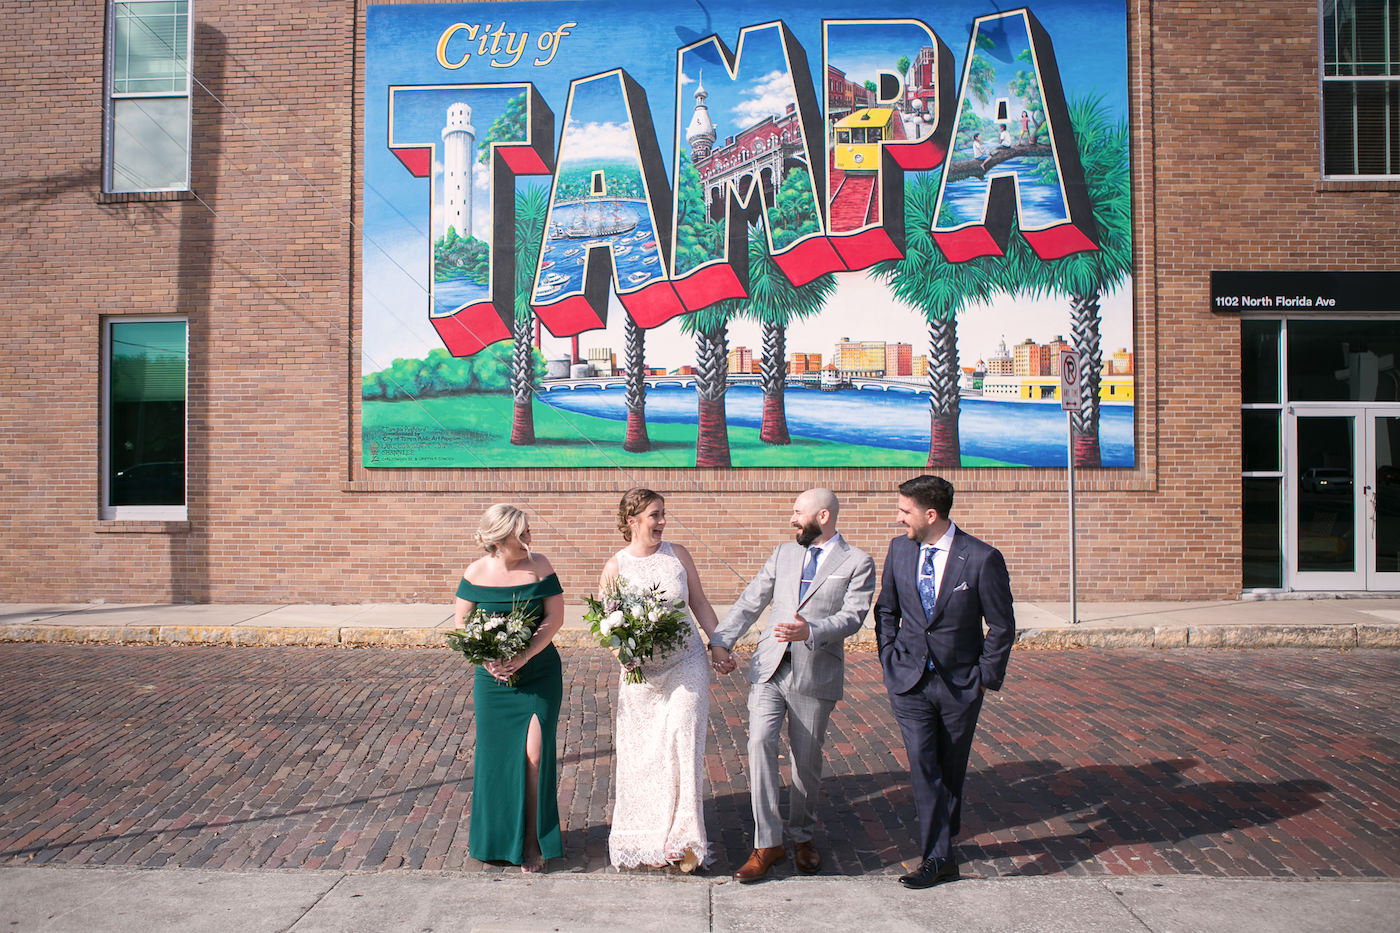 Florida Bride, Groom, Bridesmaid in Green Off the Shoulder Dress, and Groomsmen Portrait in Front of City of Tampa Mural on Red Brick Building | Wedding Photographer Carrie Wildes Photography